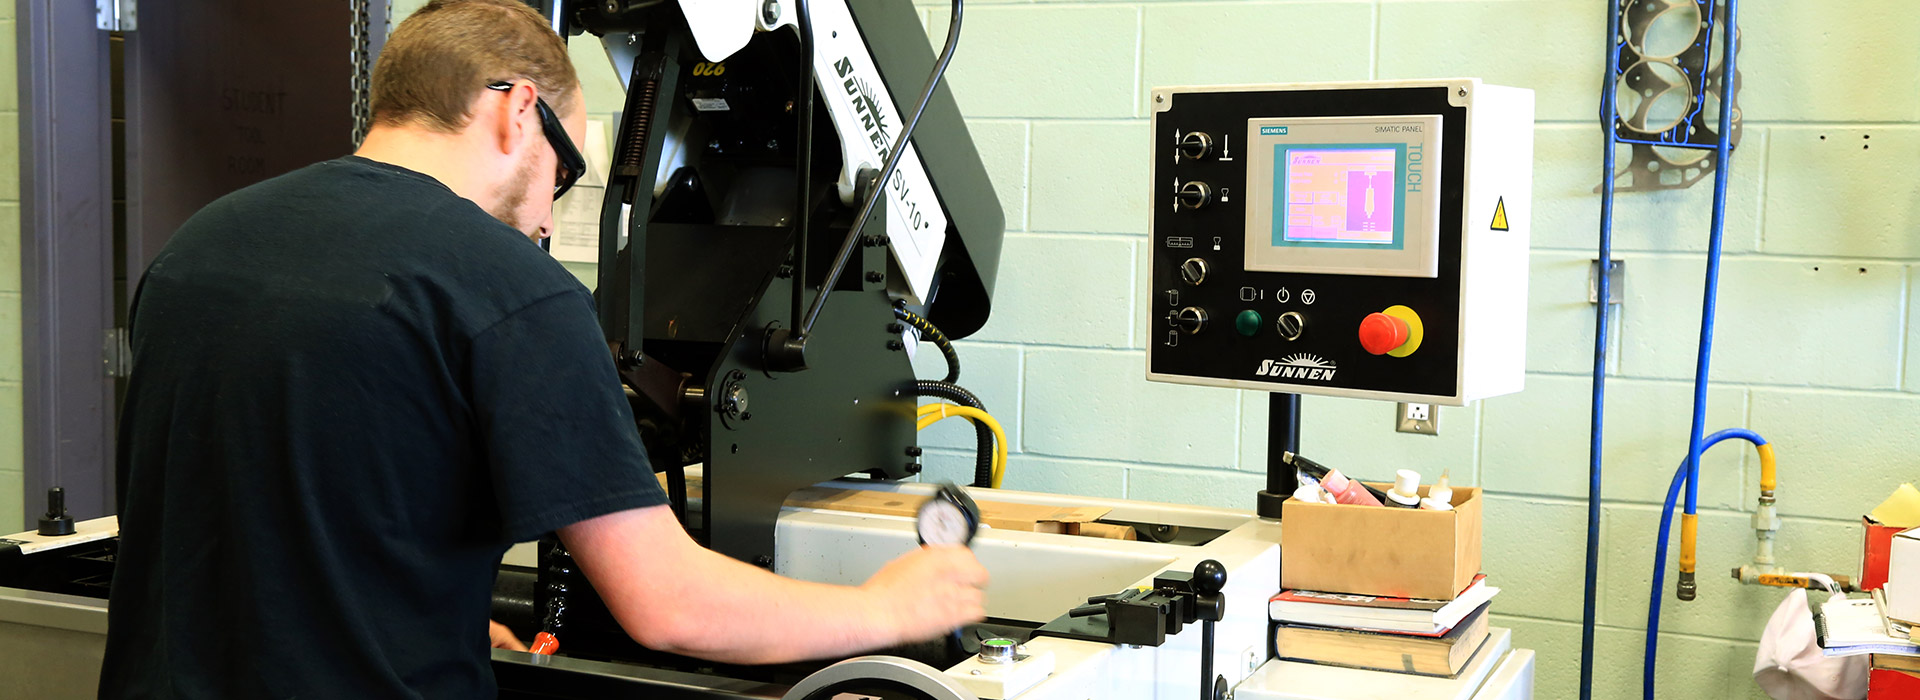 a student uses manufacturing equipment